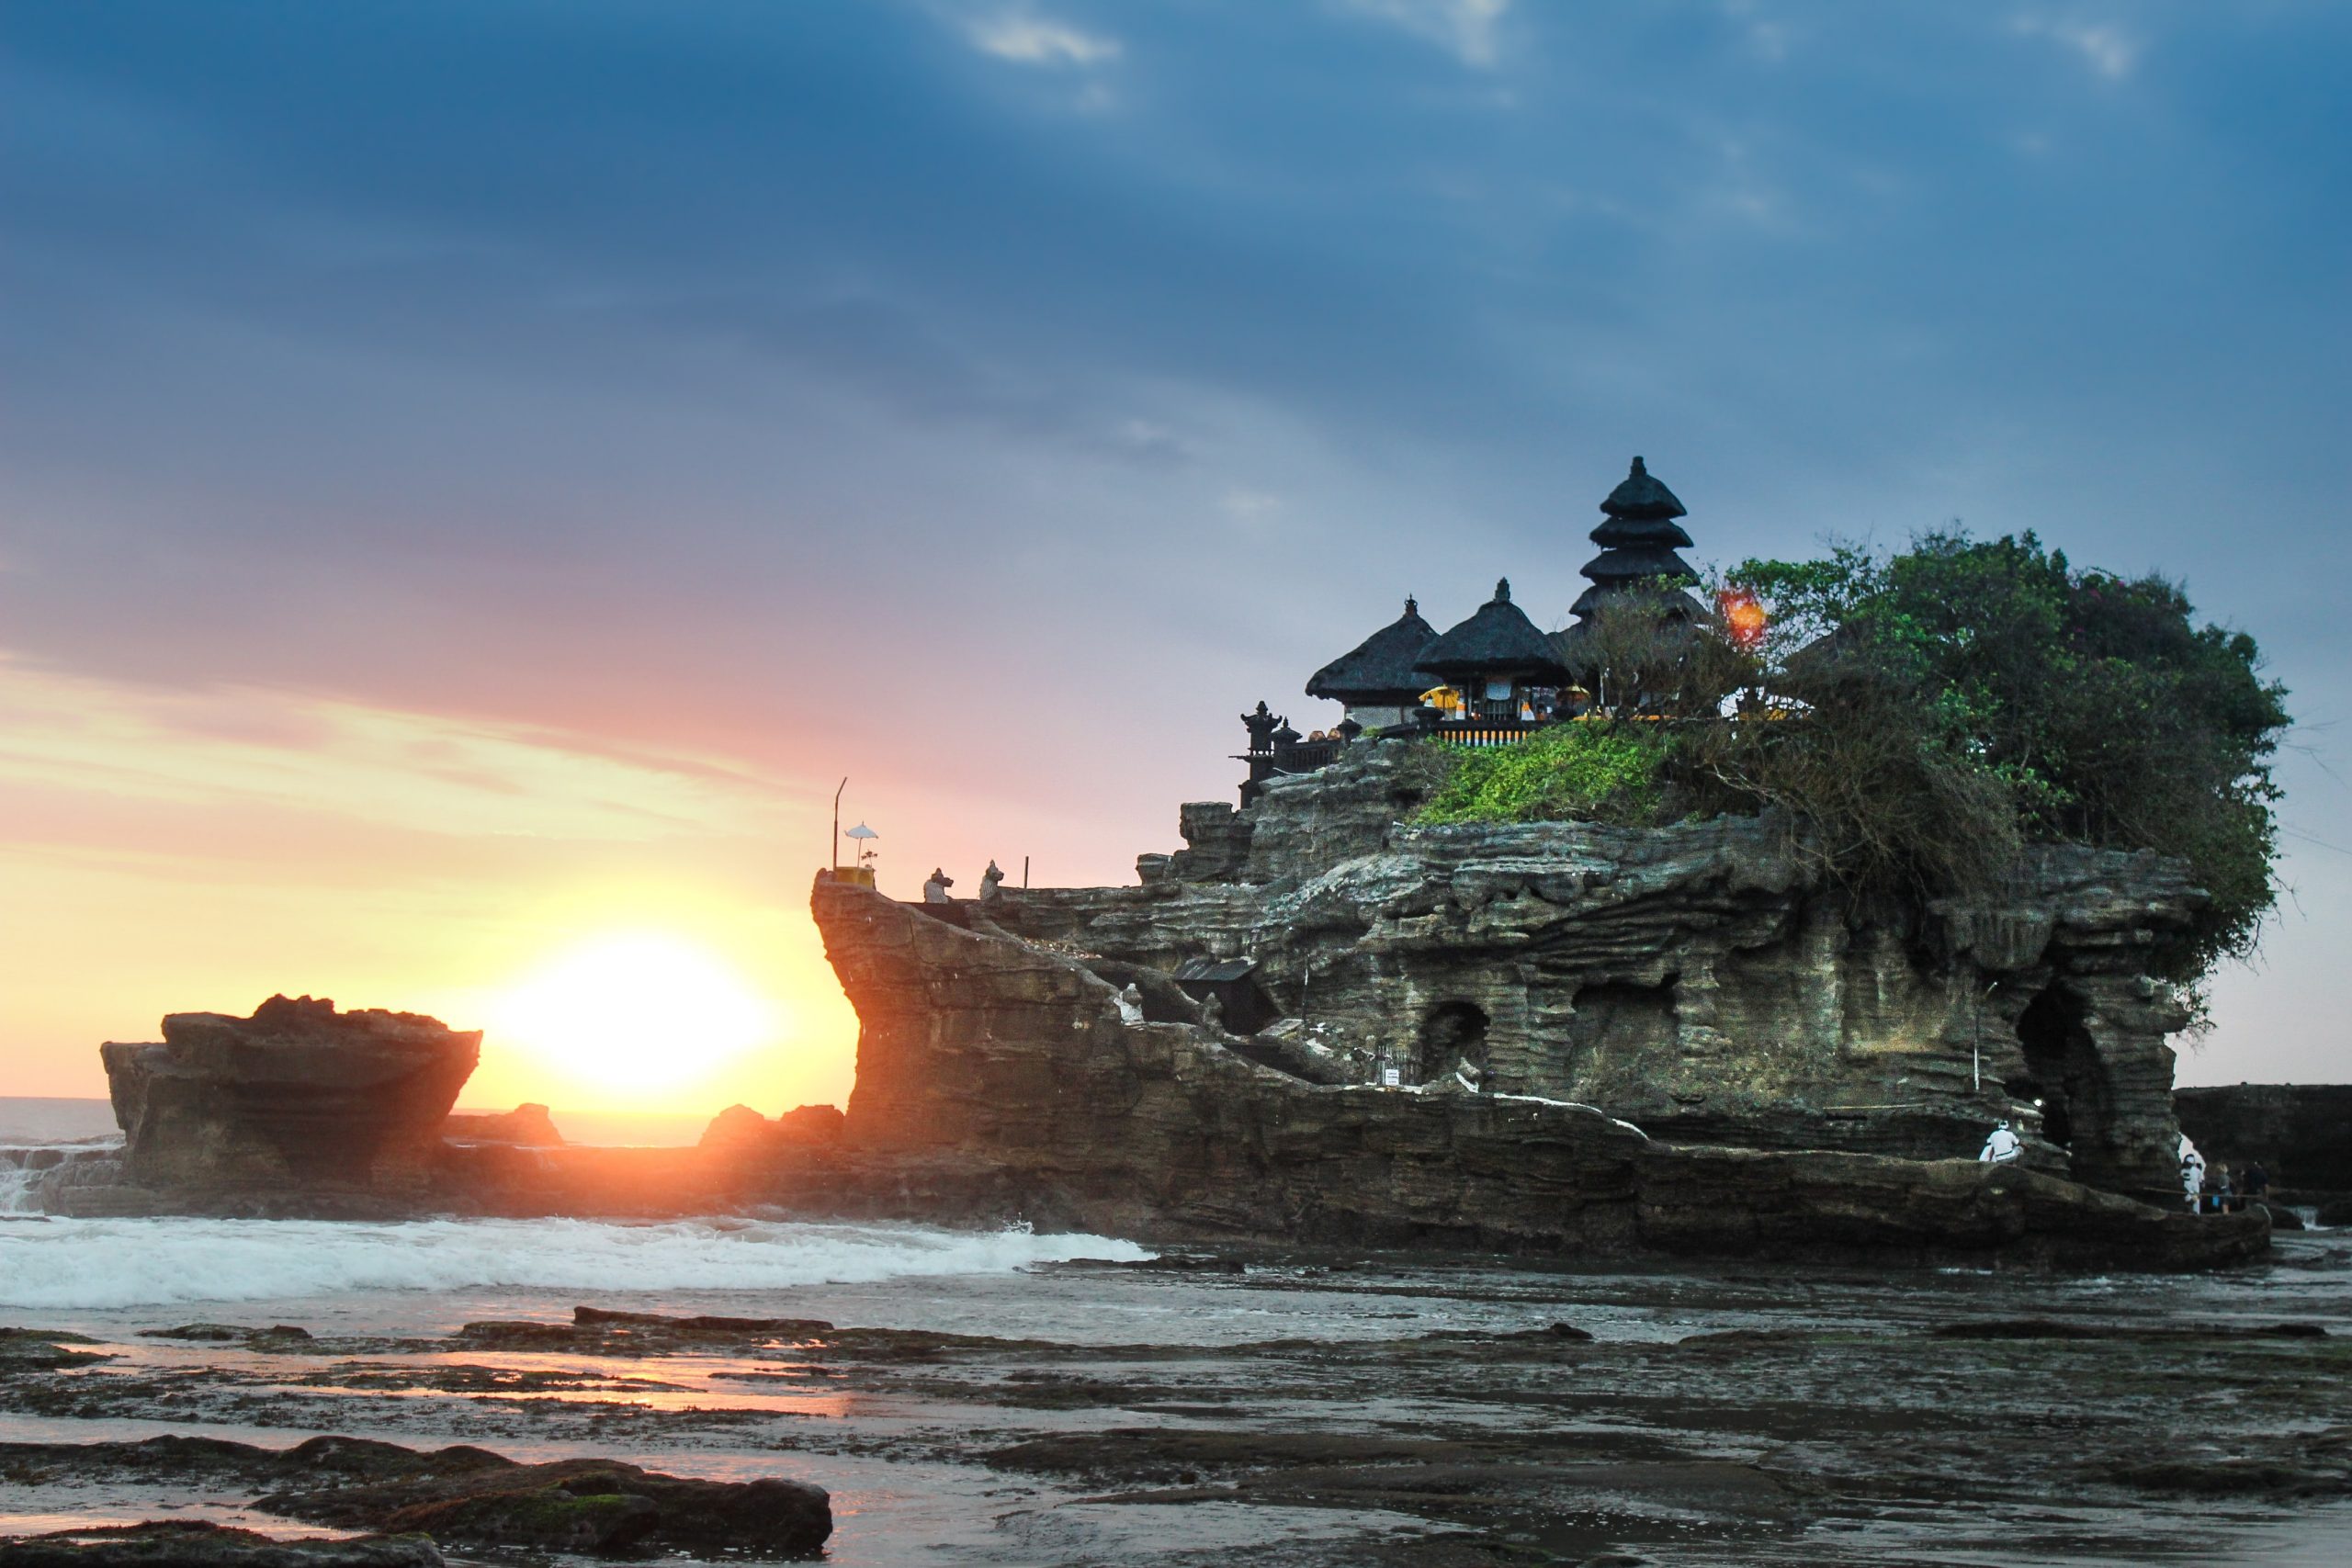 This was a temple in Bali well known for the sunset’s it can produce and trust me I was not the only person snapping this moment on their camera, If anything I wish I could go back to the location and try again but I tried multiple angle’s before getting this shot which I believe to be the best of my capabilities.